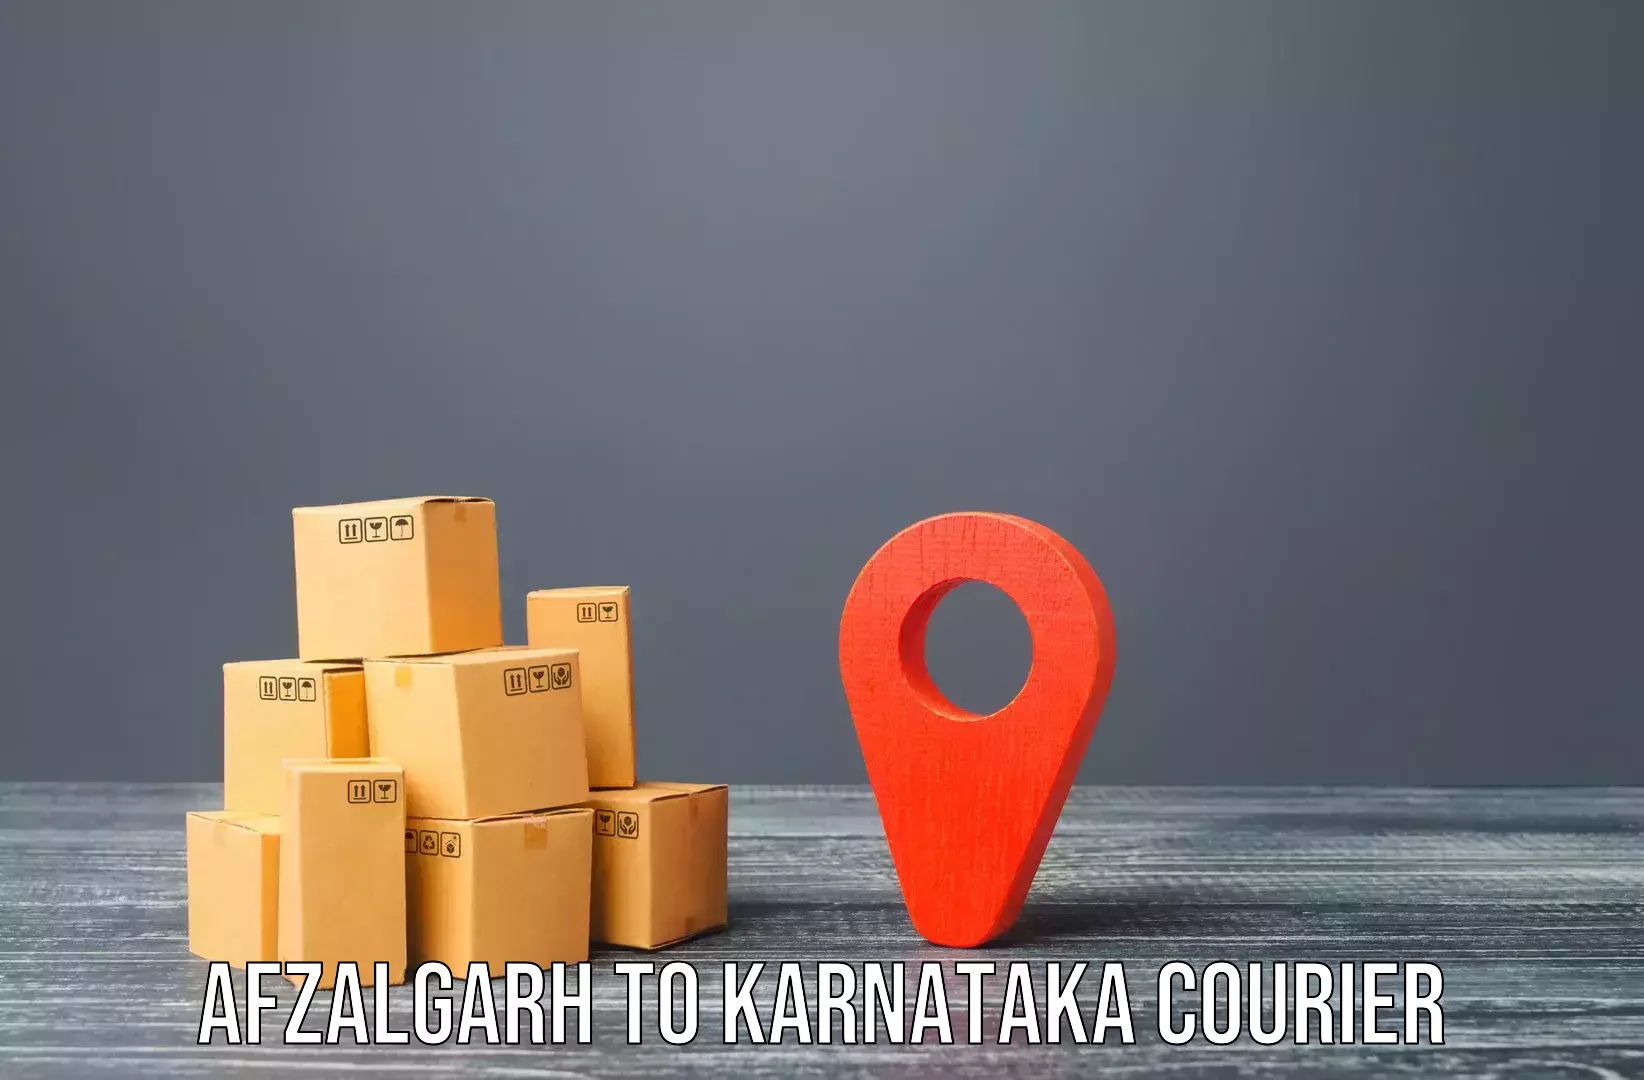 Home moving specialists Afzalgarh to Chikkaballapur